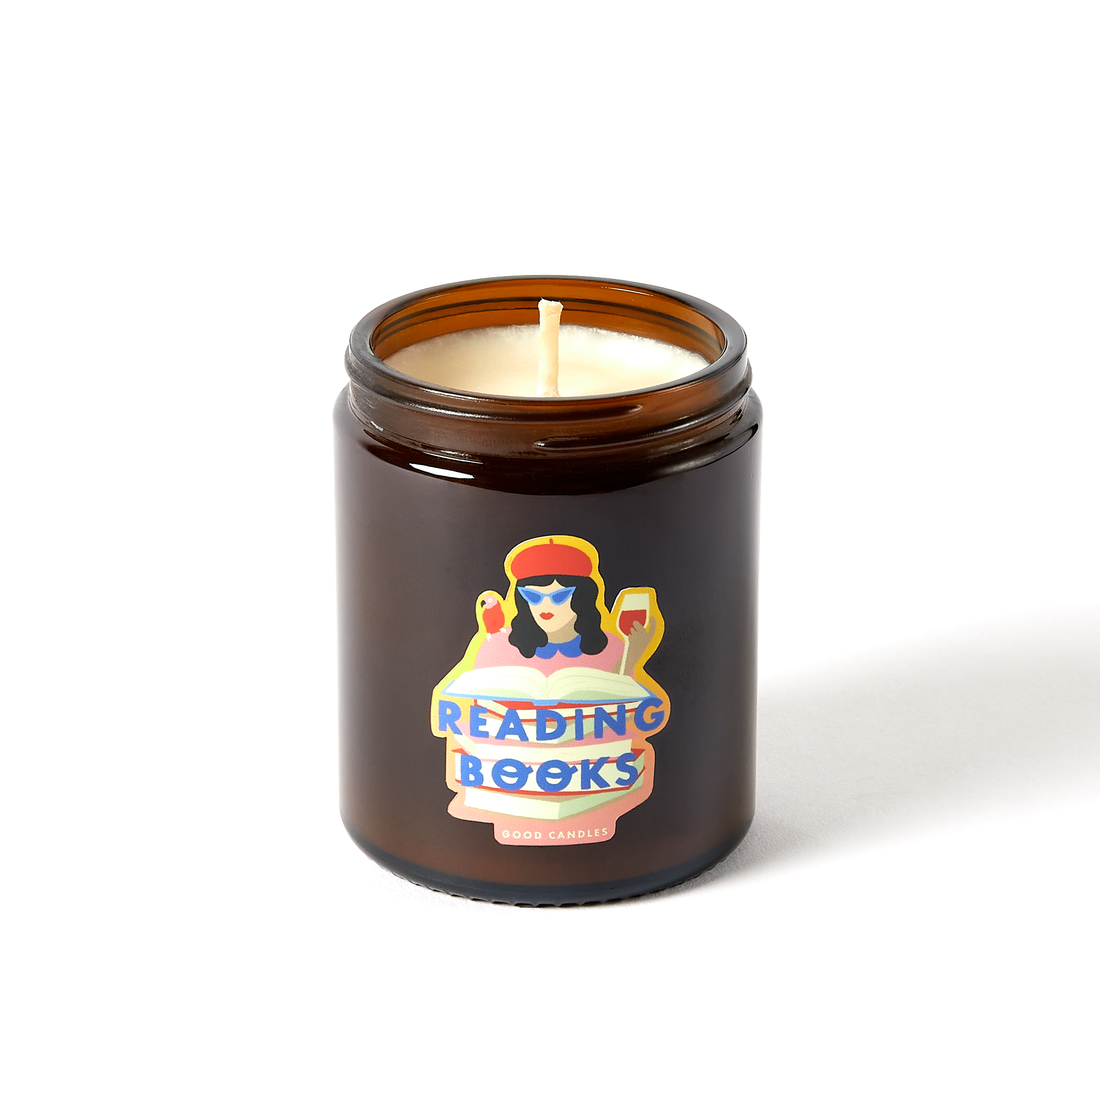 Reading Books Scented Travel Candle